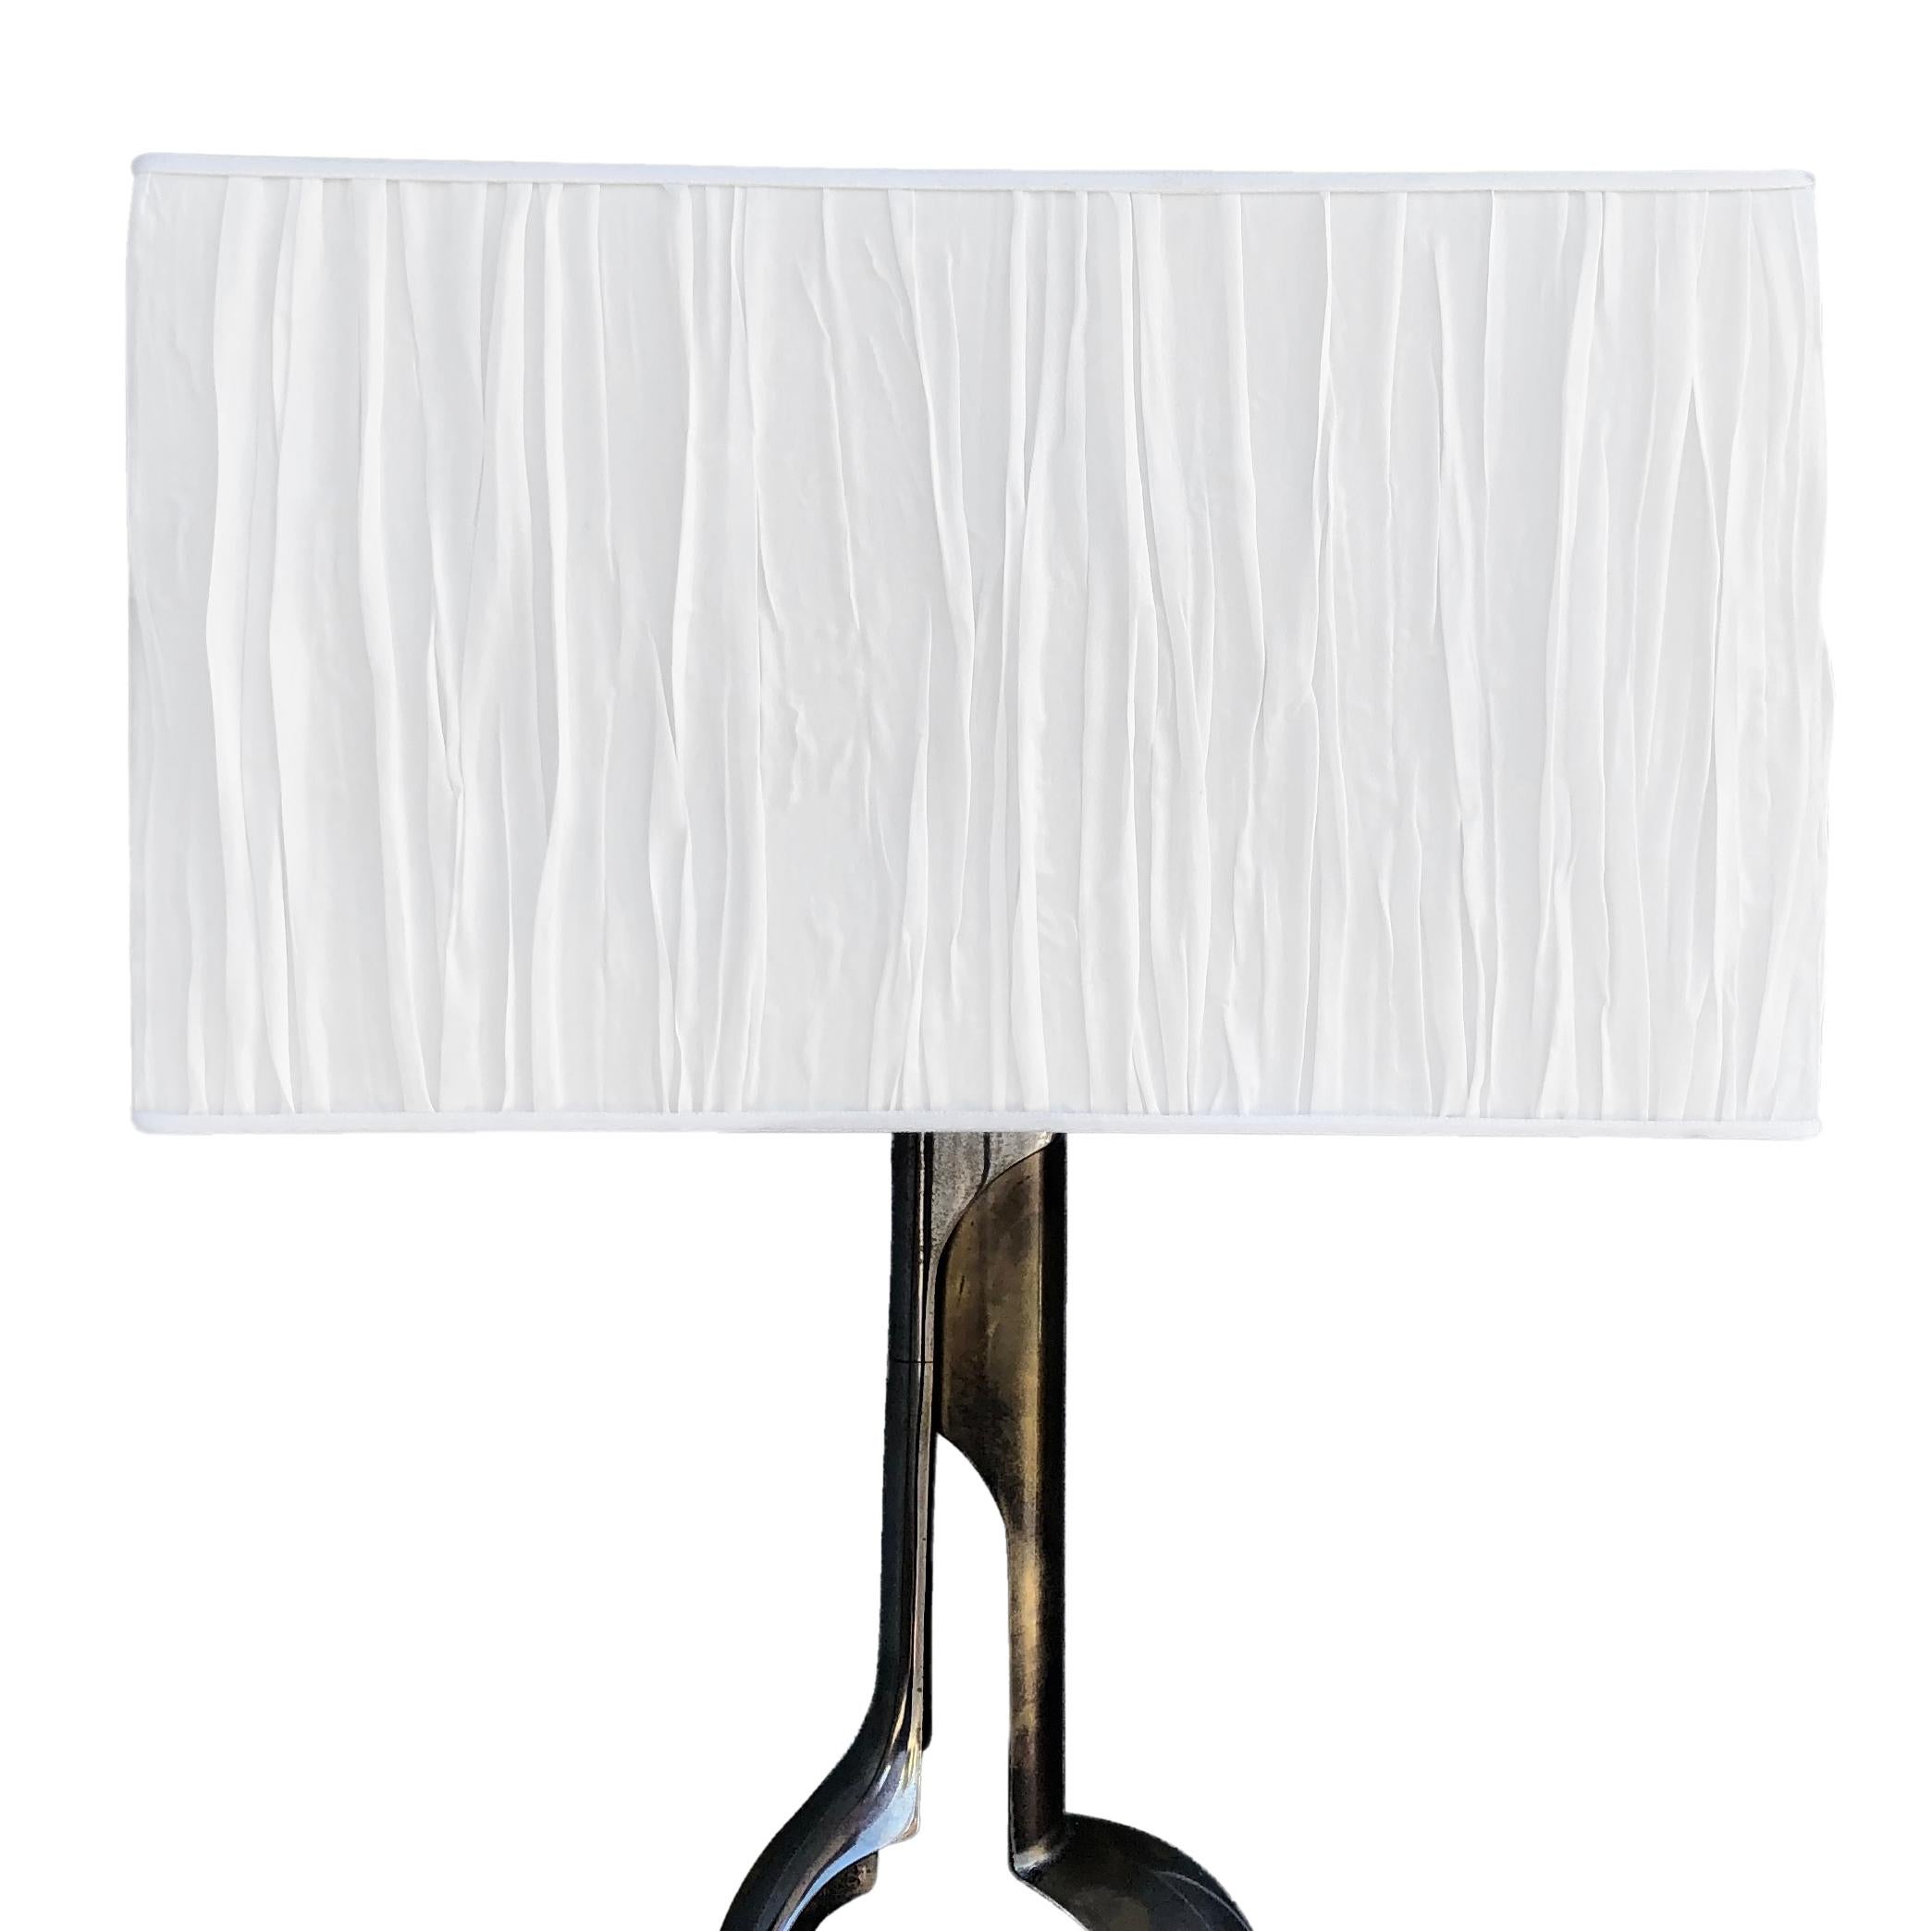 A vintage Mid-Century Modern Italian chrome table lamp with a brass base. Featuring a one-light socket, in good condition. The wires have been renewed. Wear consistent with age and use, circa 1960, Italy.

Measures: Base 18